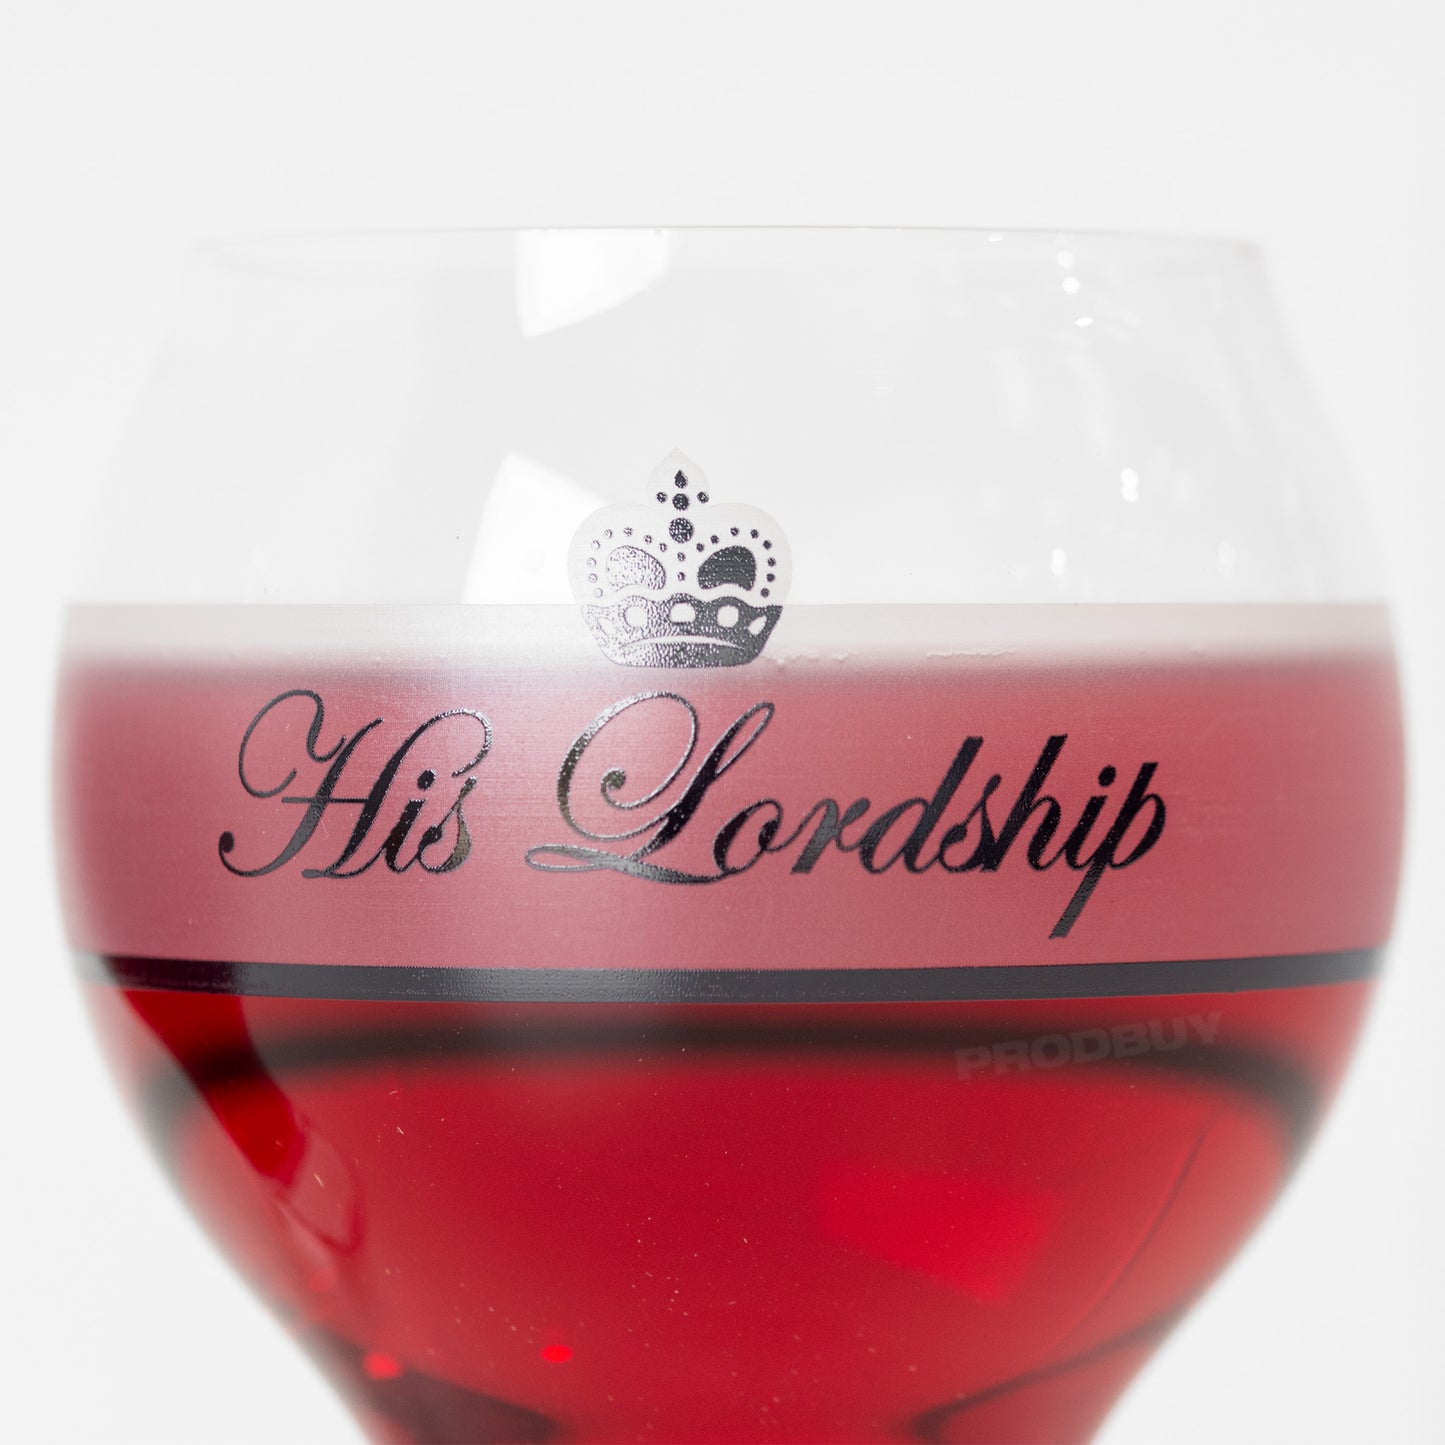 Set of 2 His Lordship and Her Ladyship Gin Glasses Bubble Stem